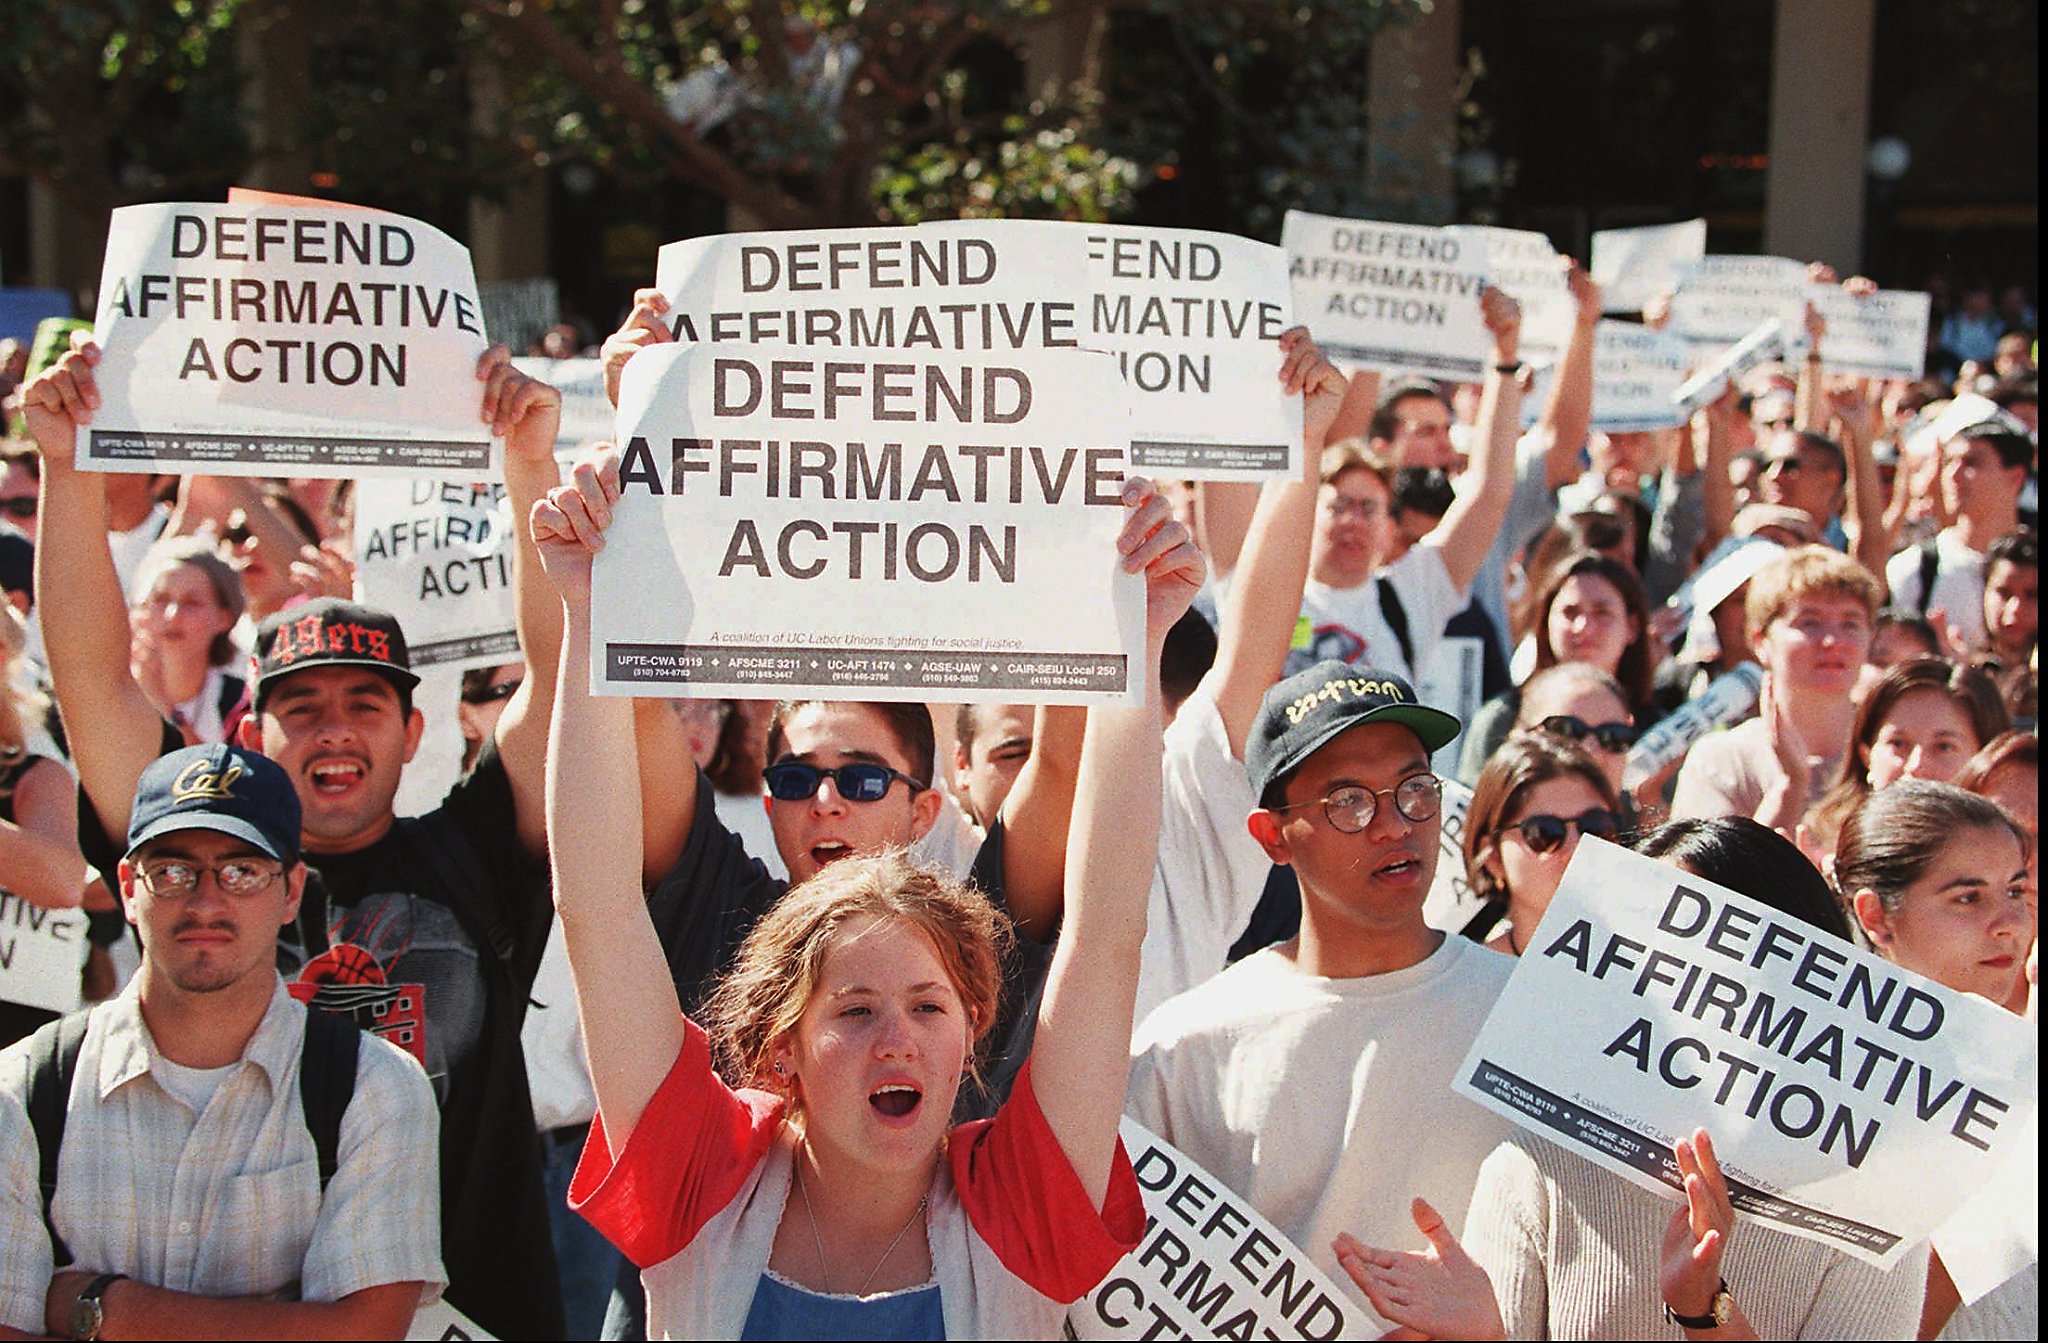 Editorial: California should reconsider affirmative action ban - SFChronicle.com